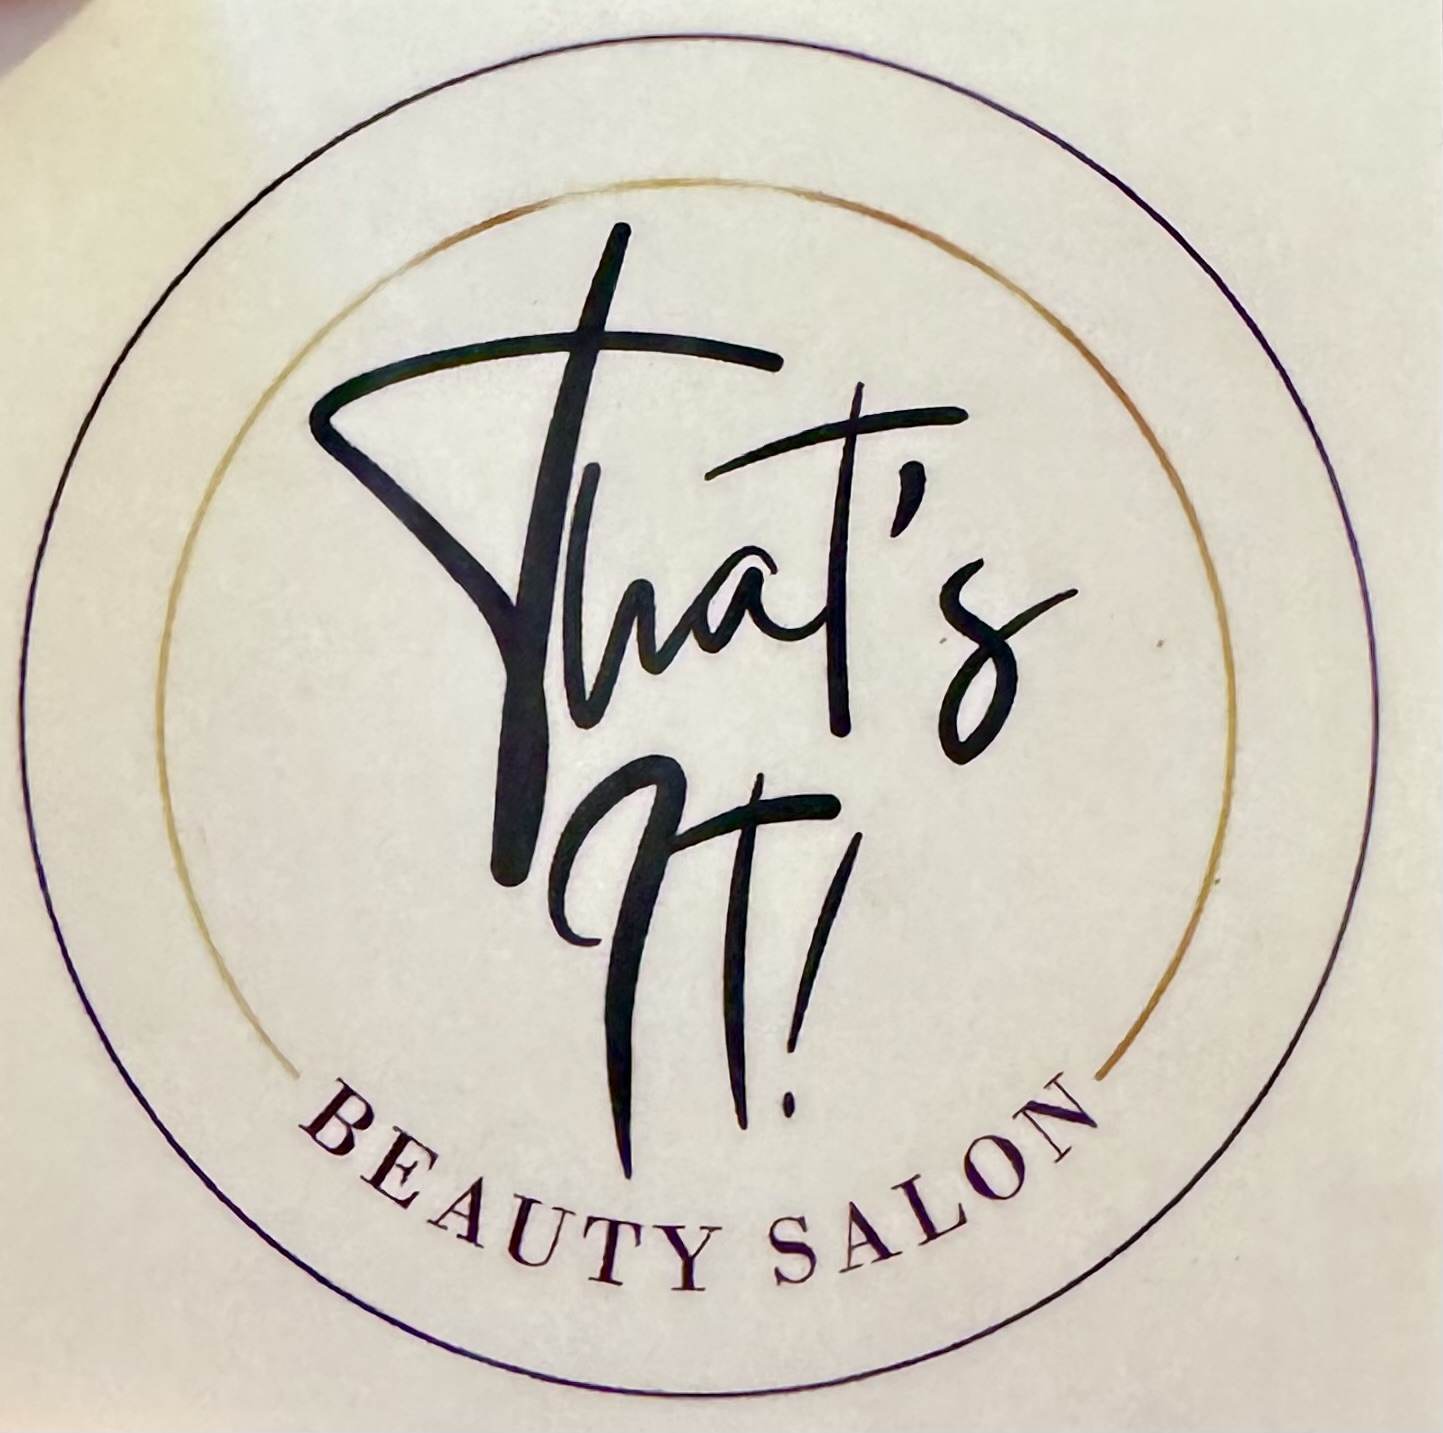 Event - That's It Salon Elevates Beauty & Celebrates Its 3 Year Anniversary